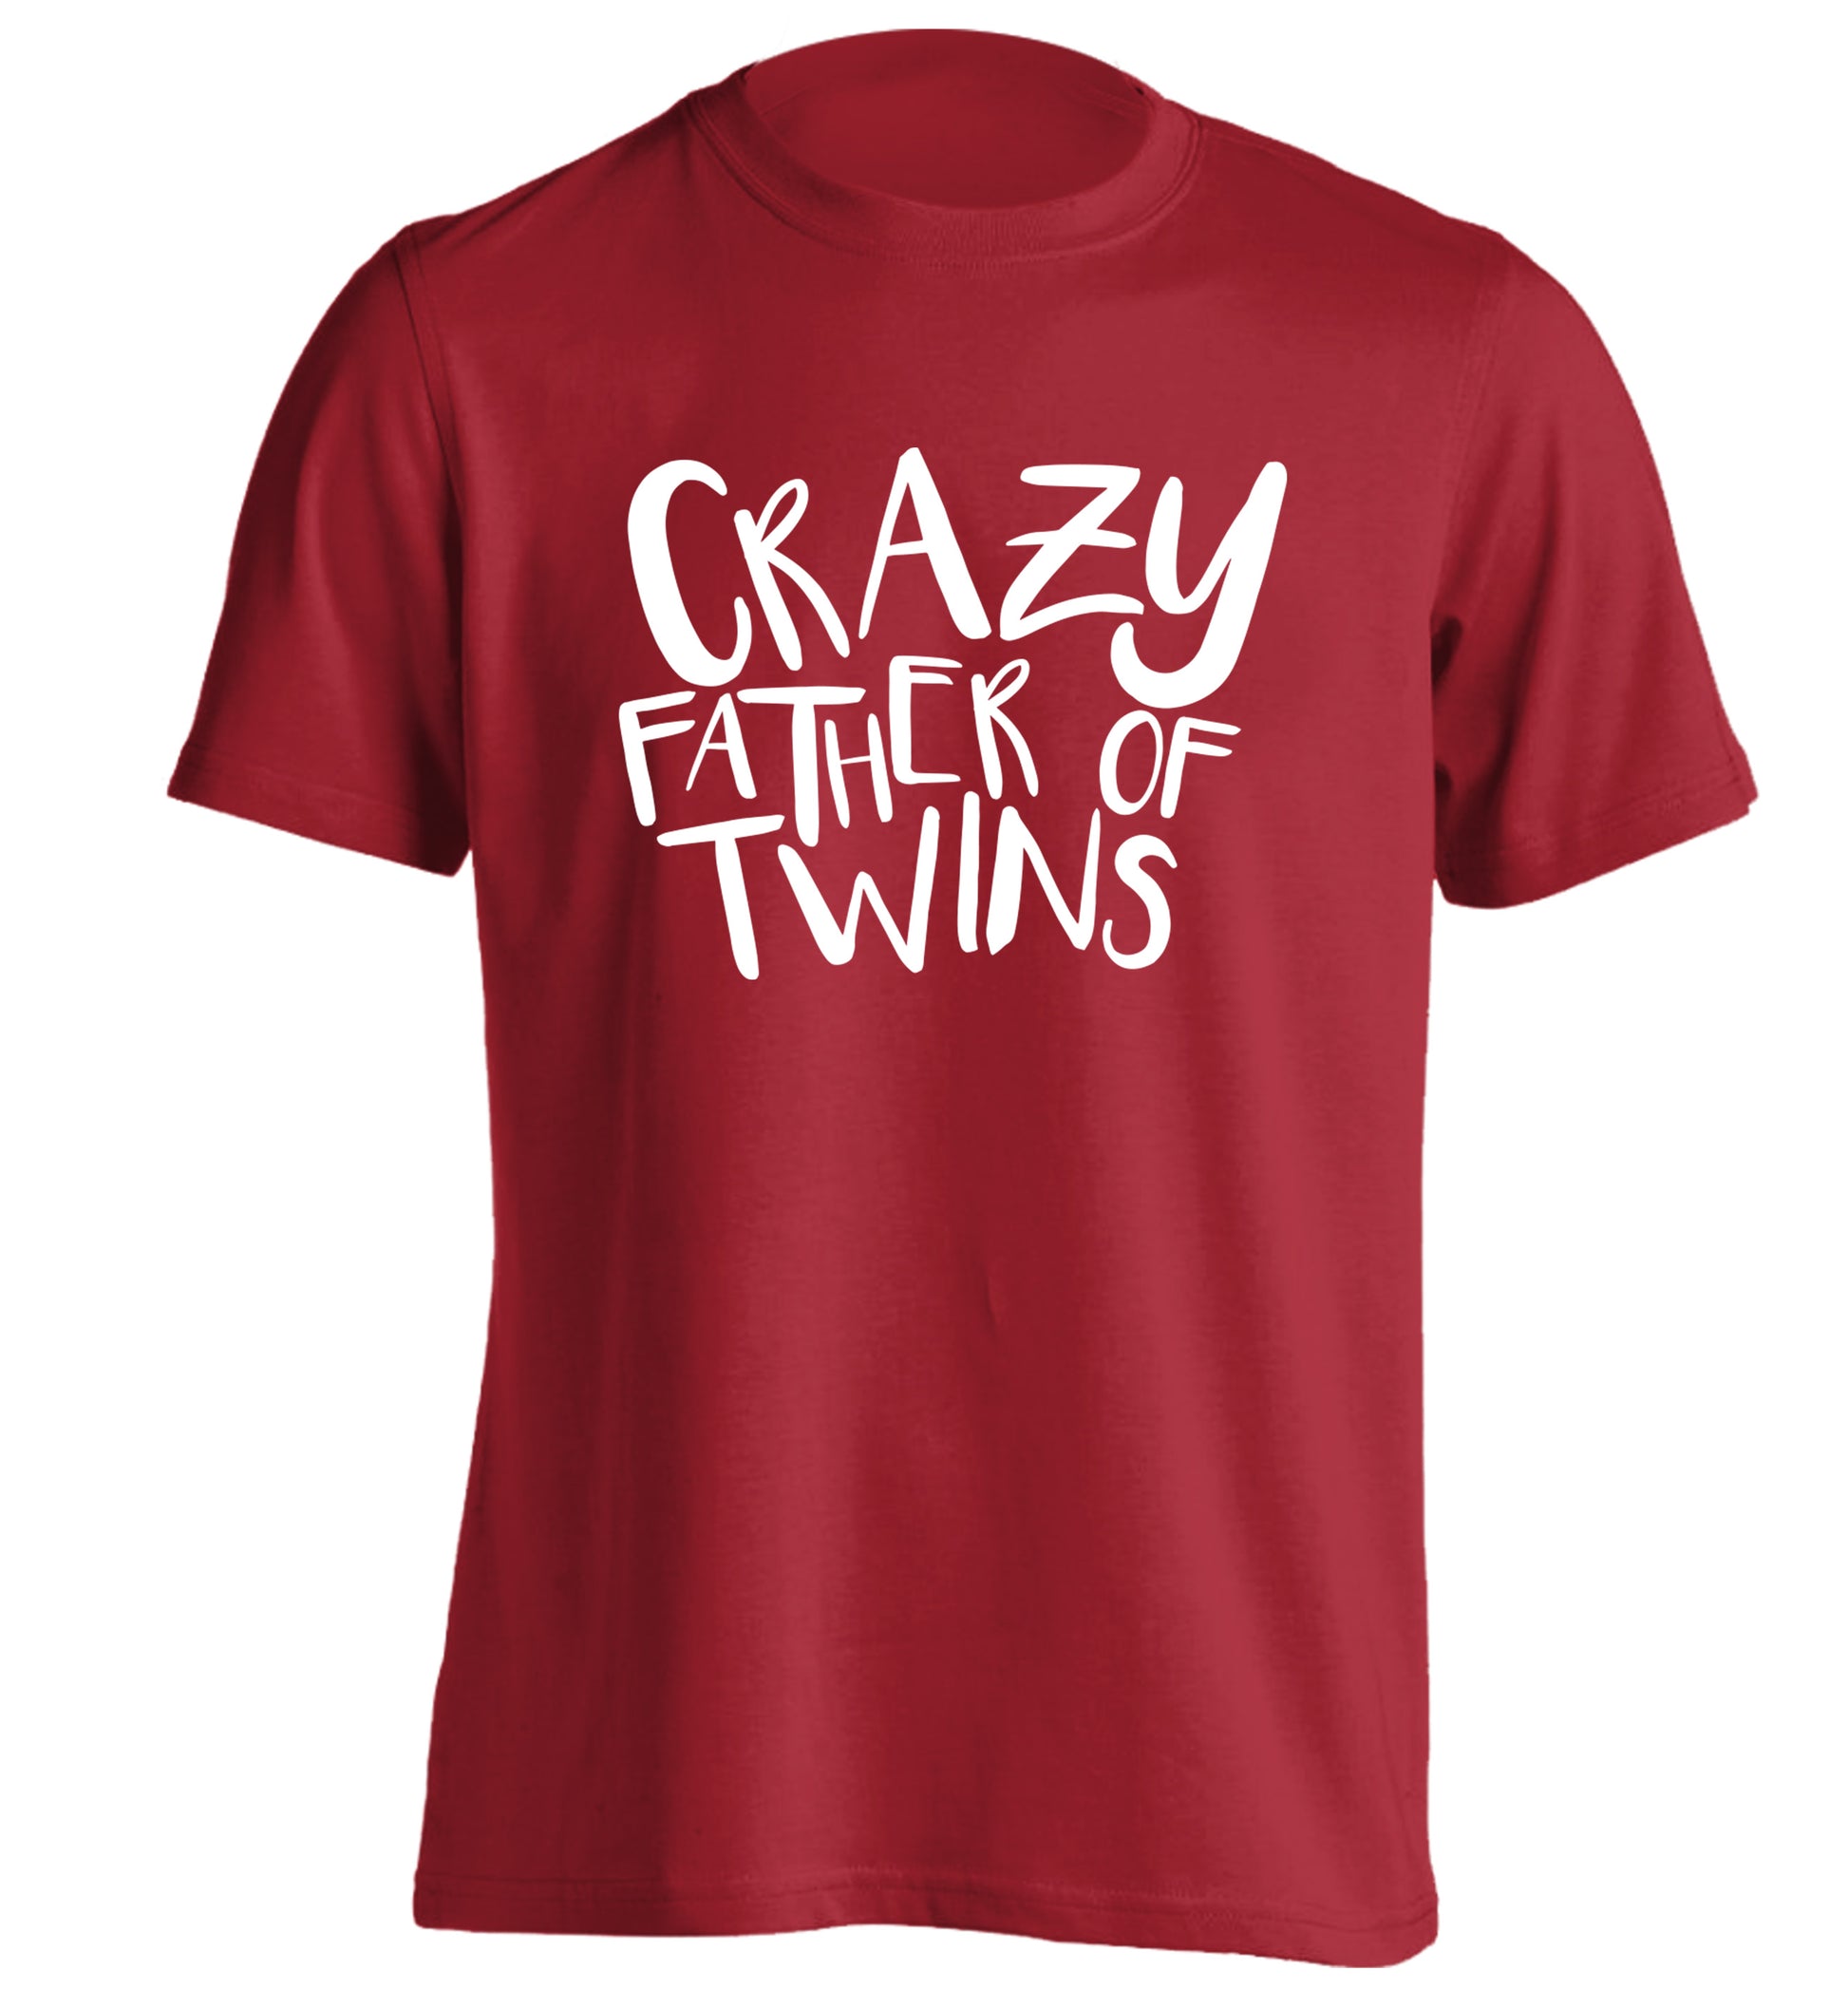 Crazy father of twins adults unisex red Tshirt 2XL